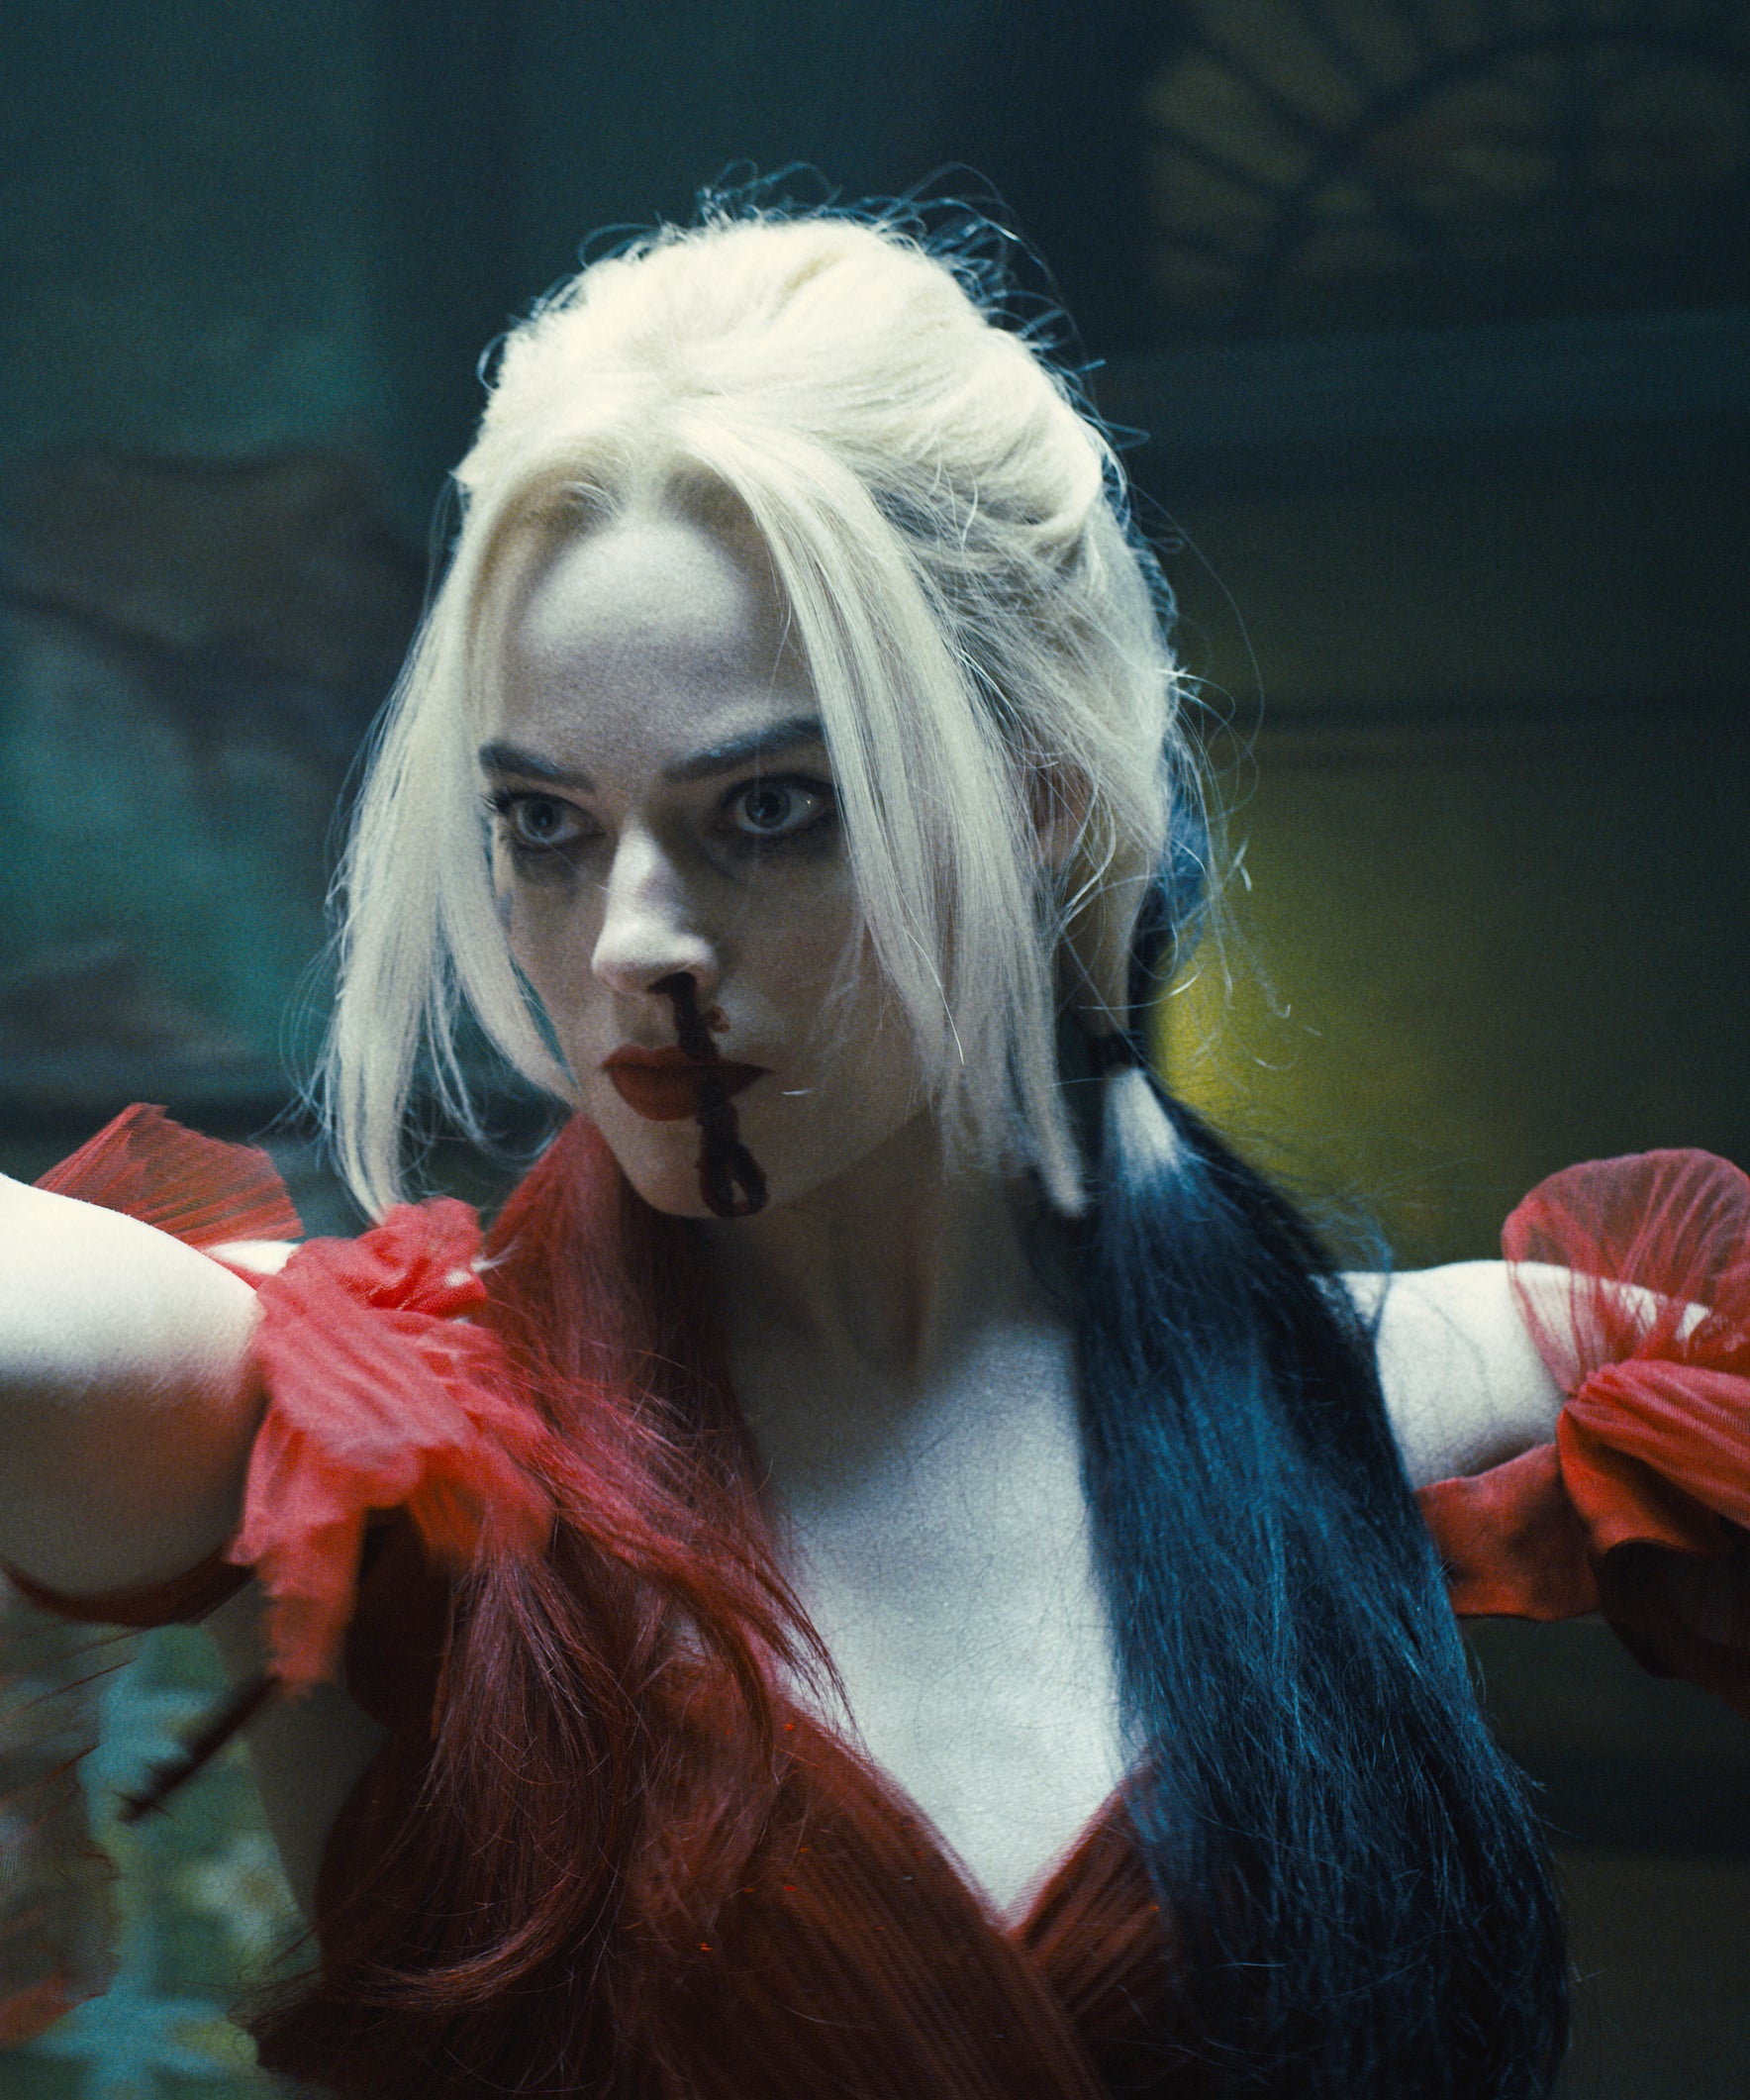 Stream Suicide Squad Hell to Pay Online, Download and Watch HD Movies